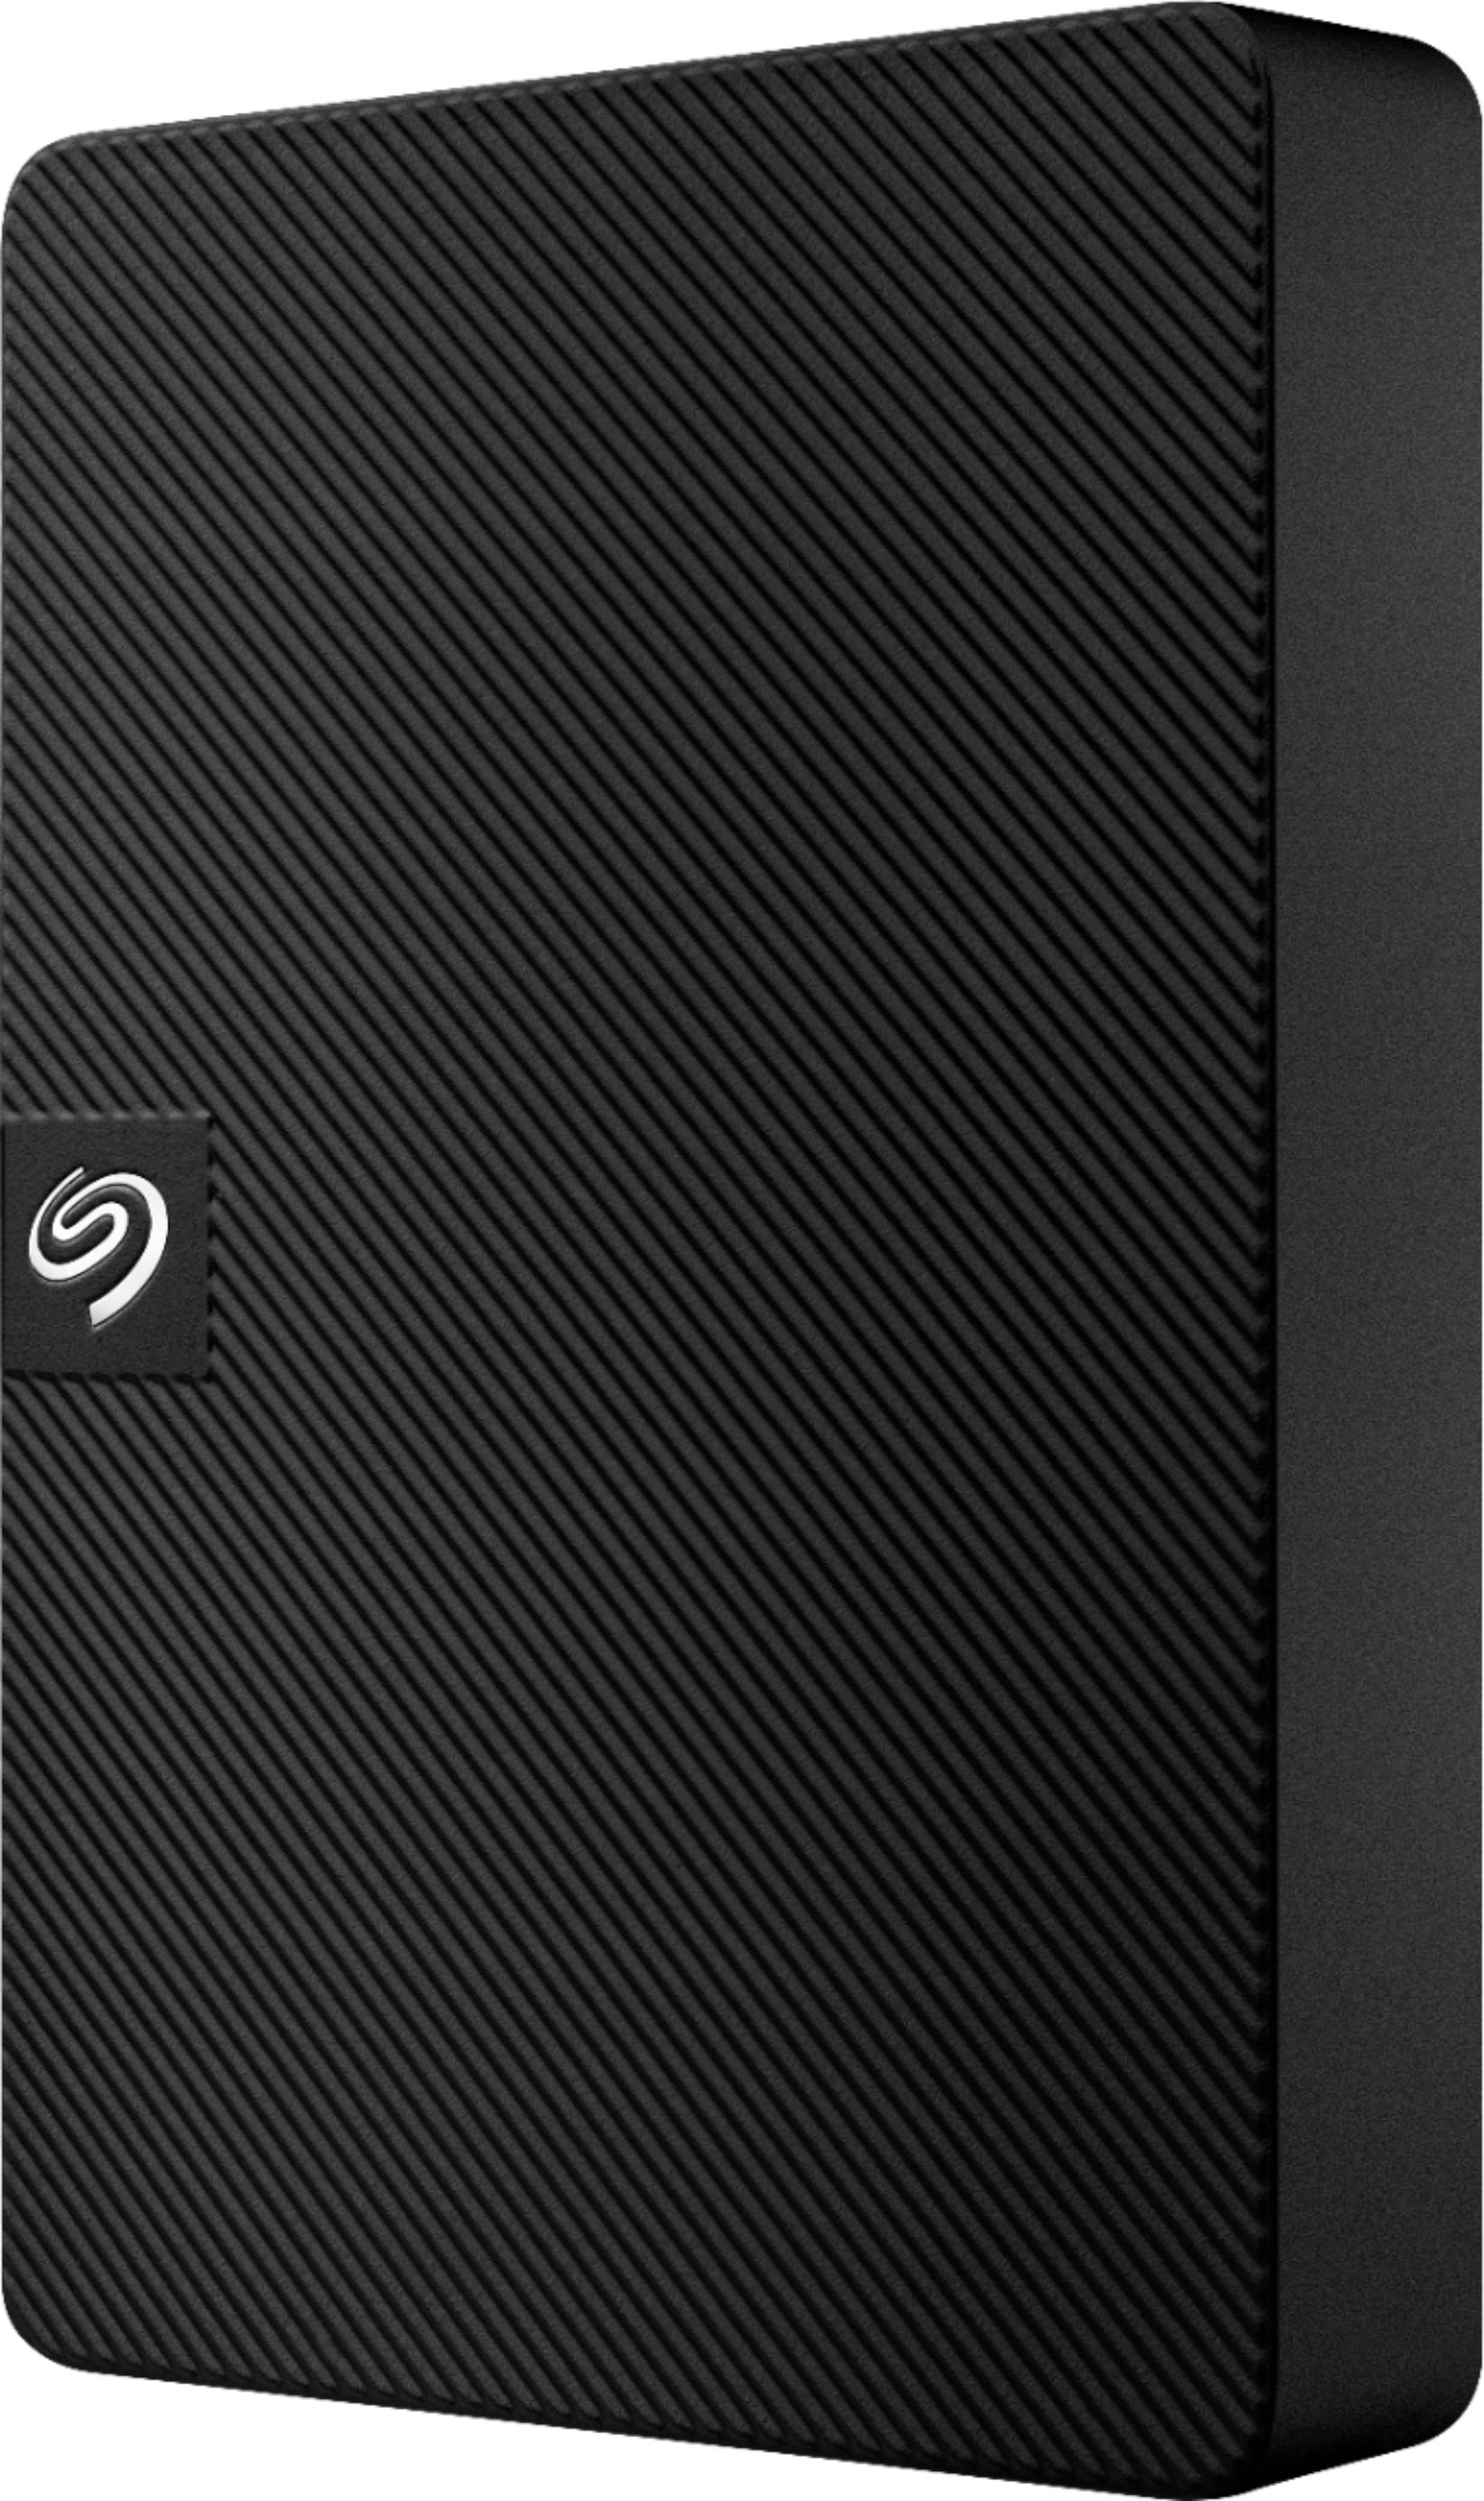 Seagate Expansion 5TB External USB 3.0 Portable Hard - Best Buy